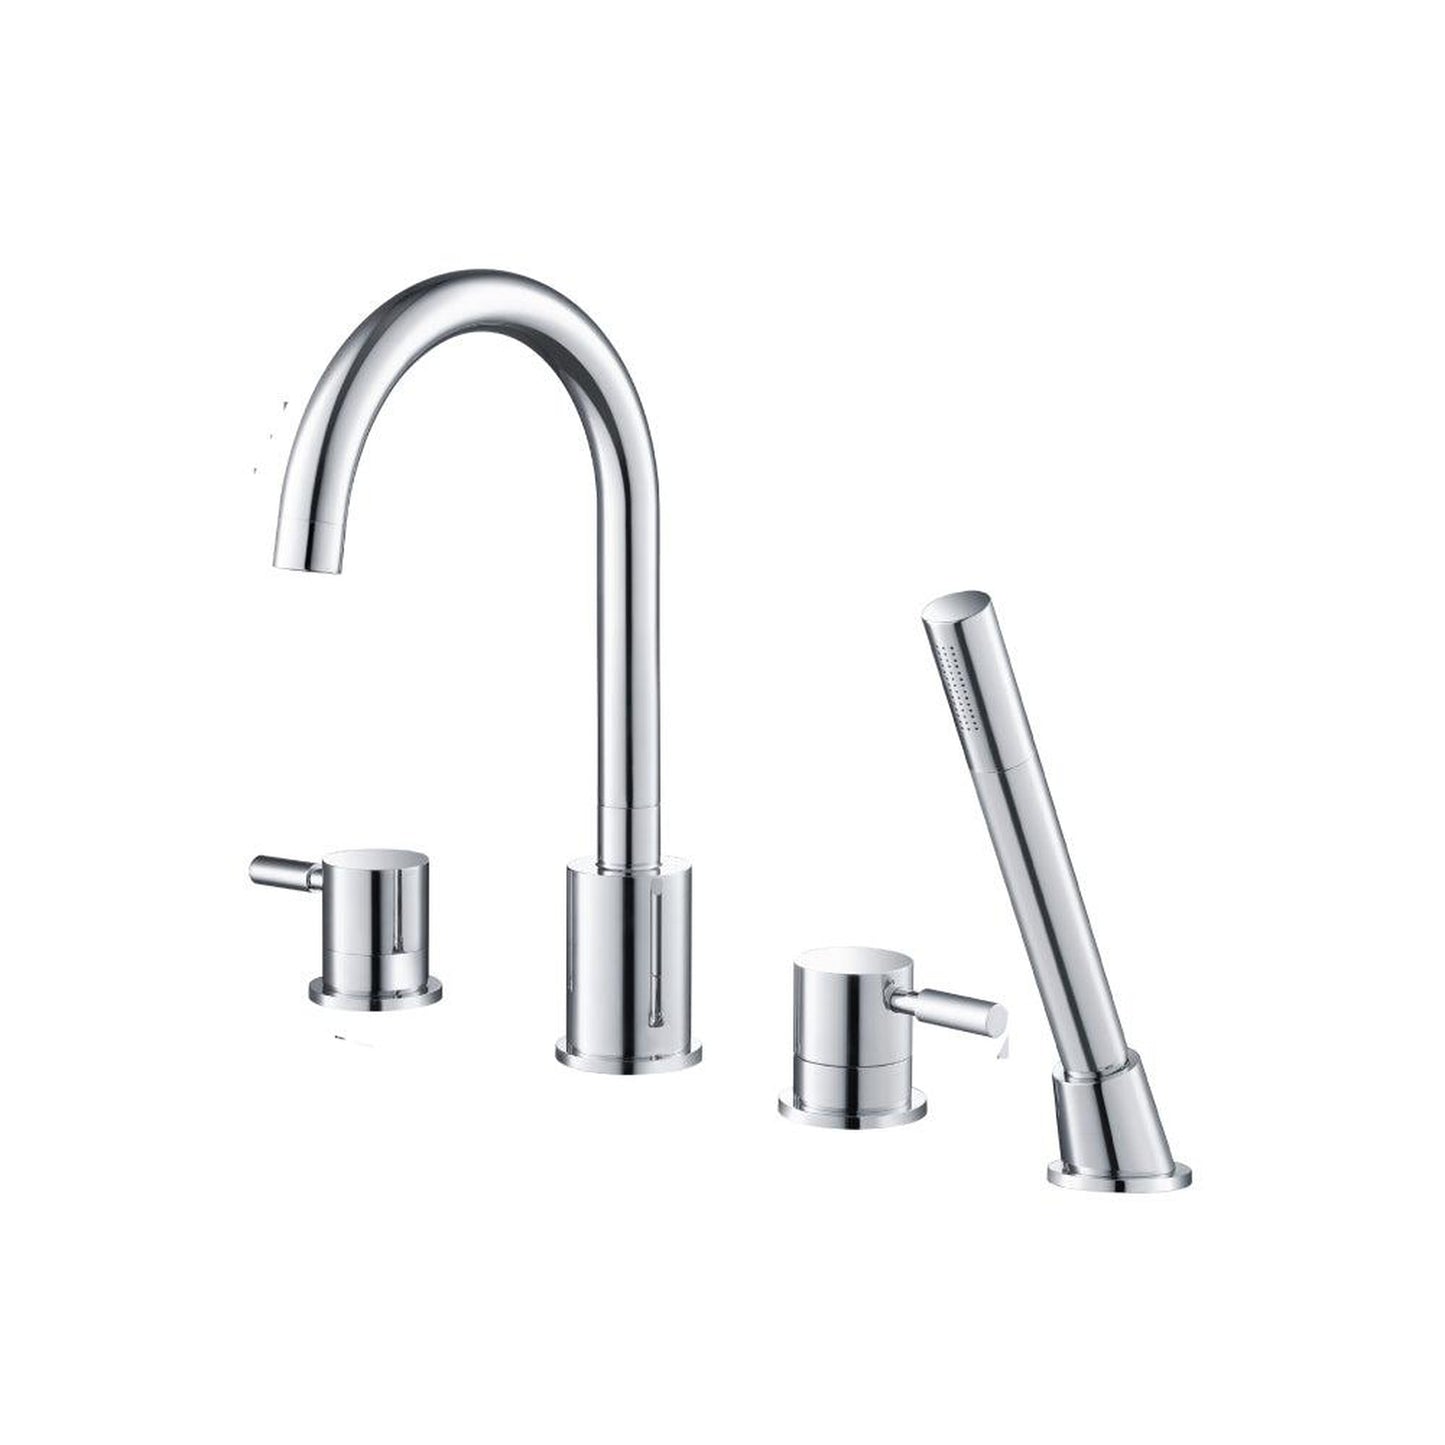 Isenberg Serie 100 14" Four-Hole Brushed Nickel PVD Solid Brass Deck-Mounted Roman Bathtub Faucet With Hand Shower